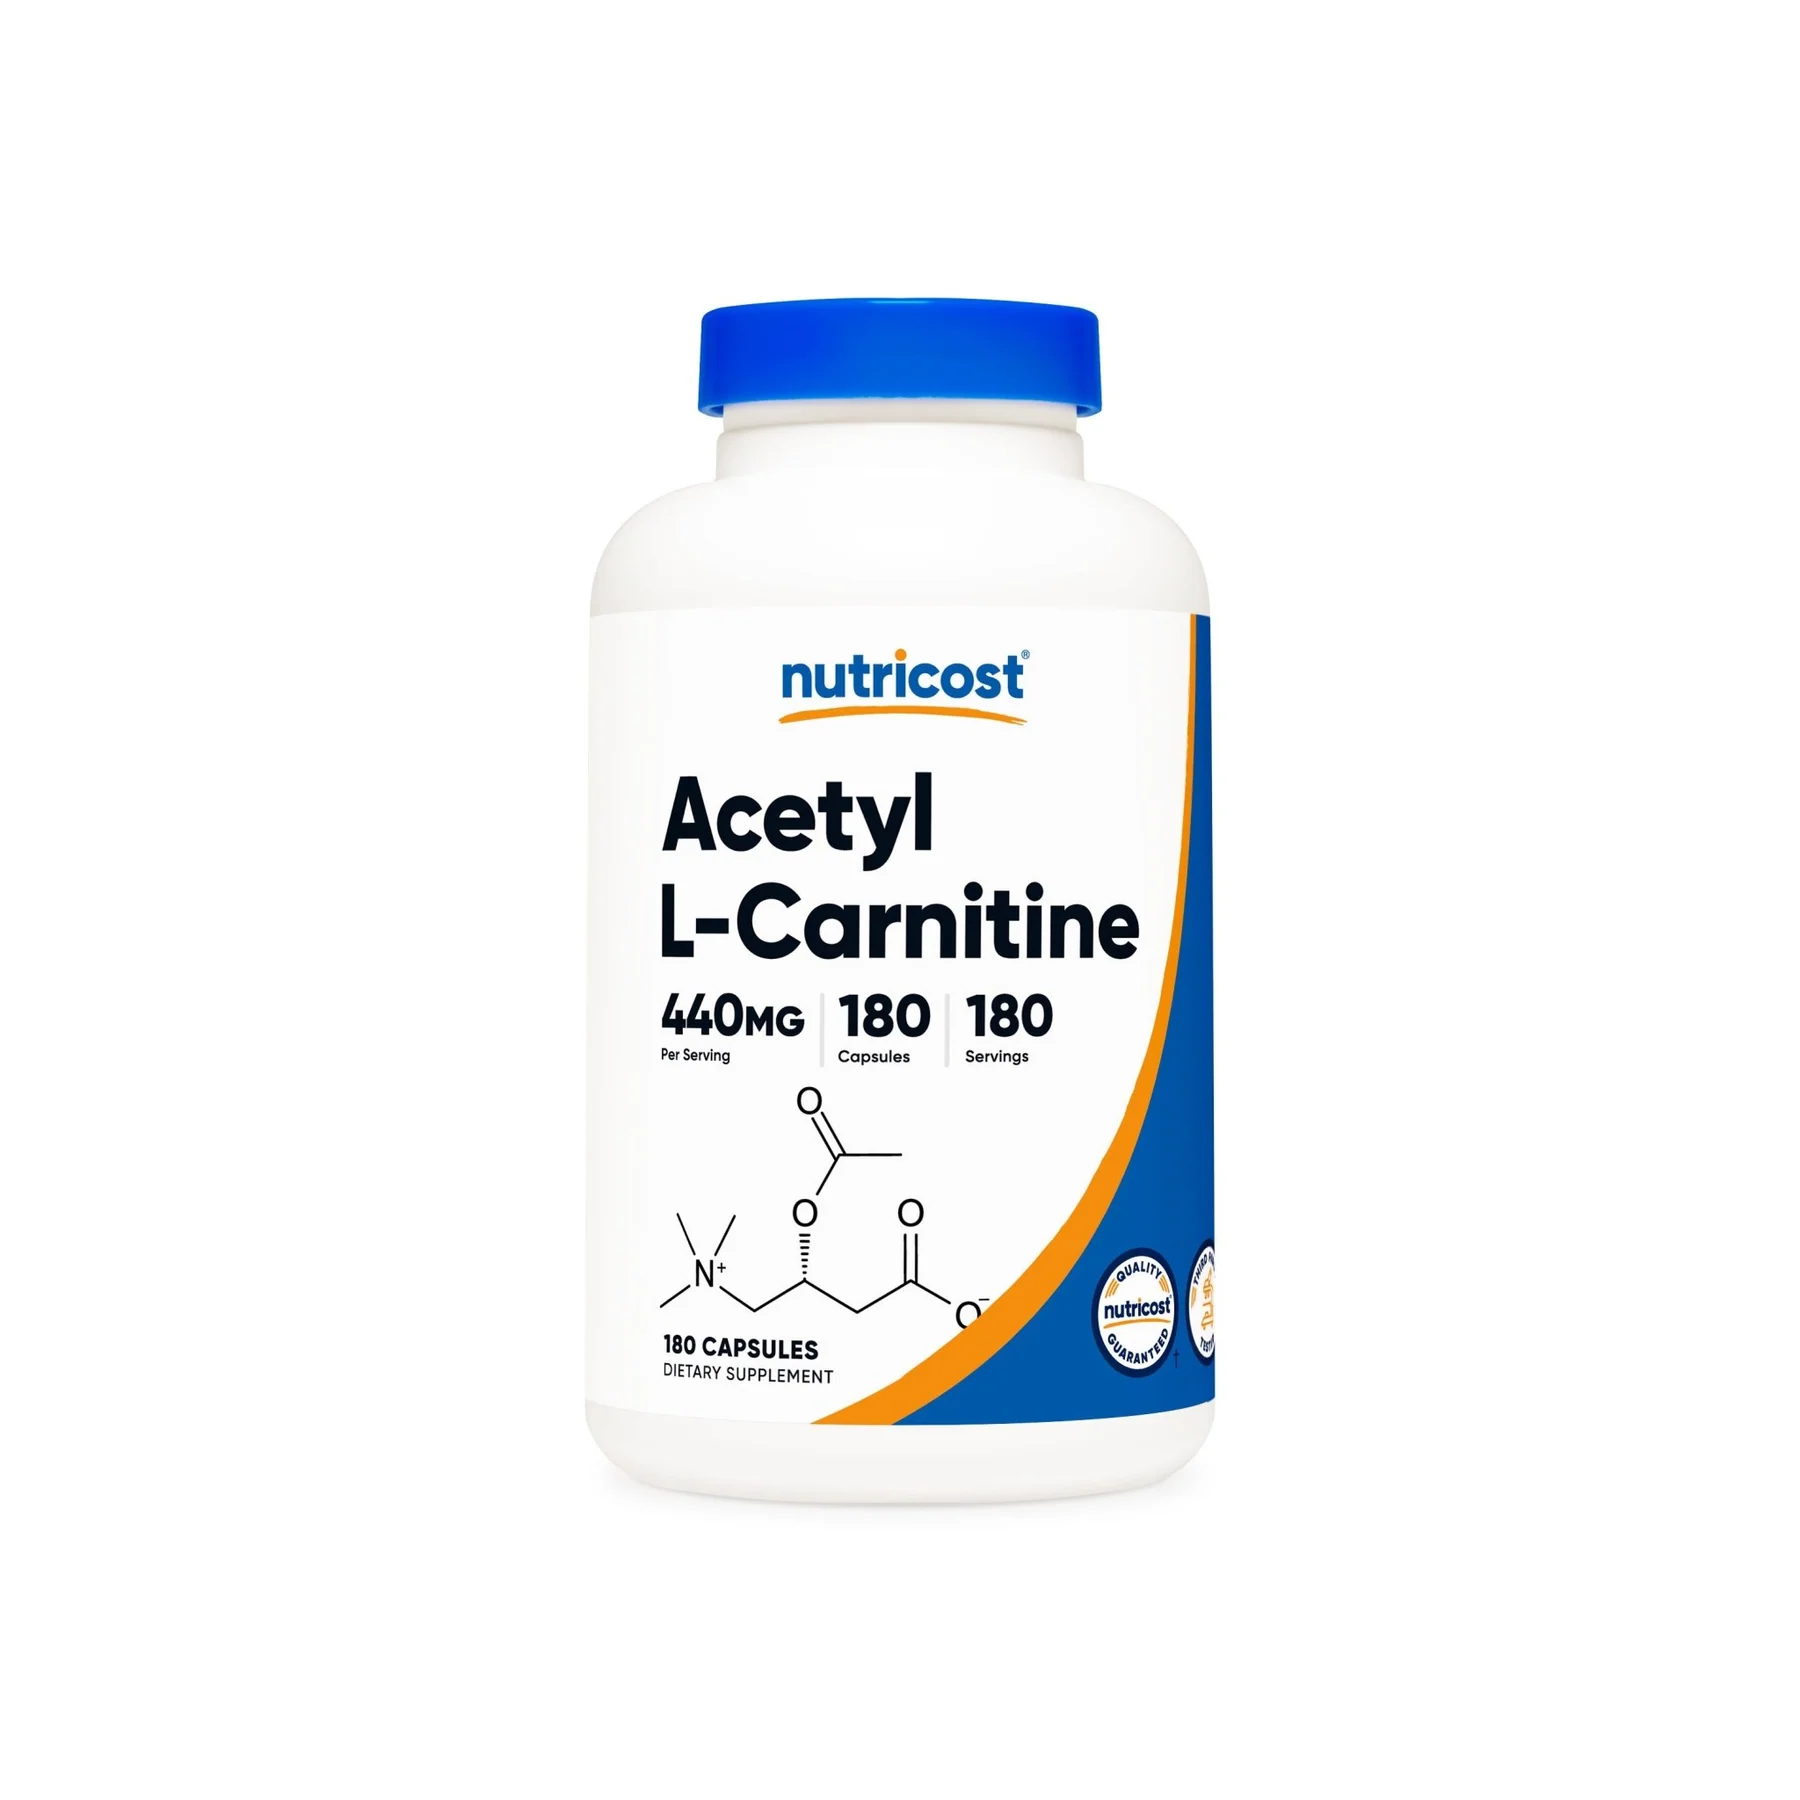 Nutricost Acetyl L-Carnitine